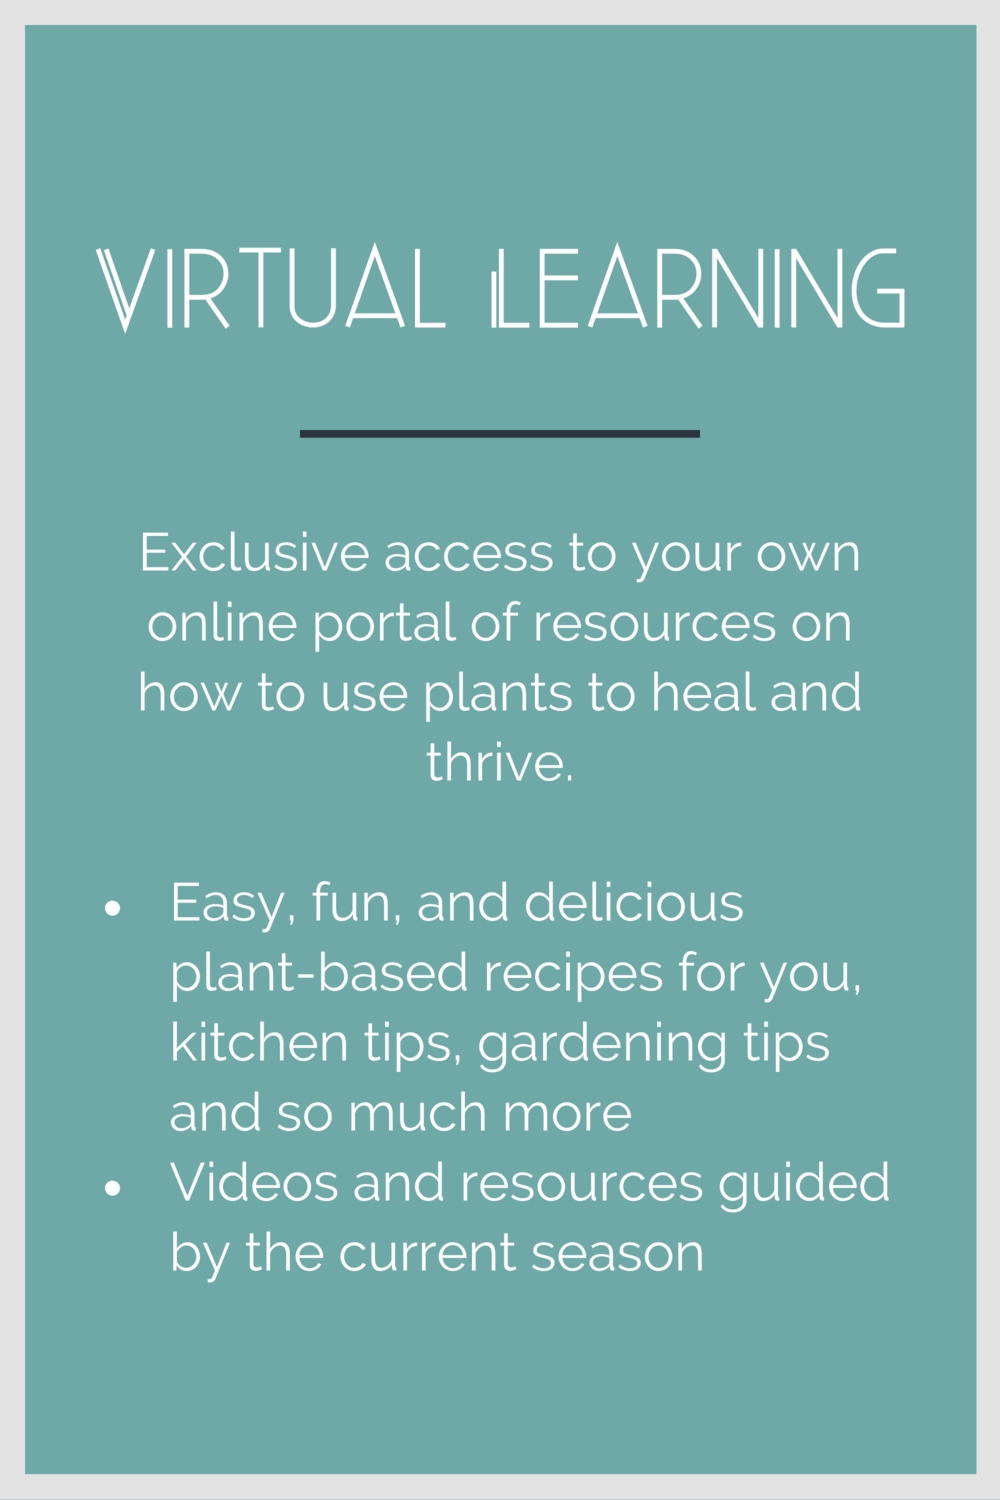 Copy of Virtual Learning.png